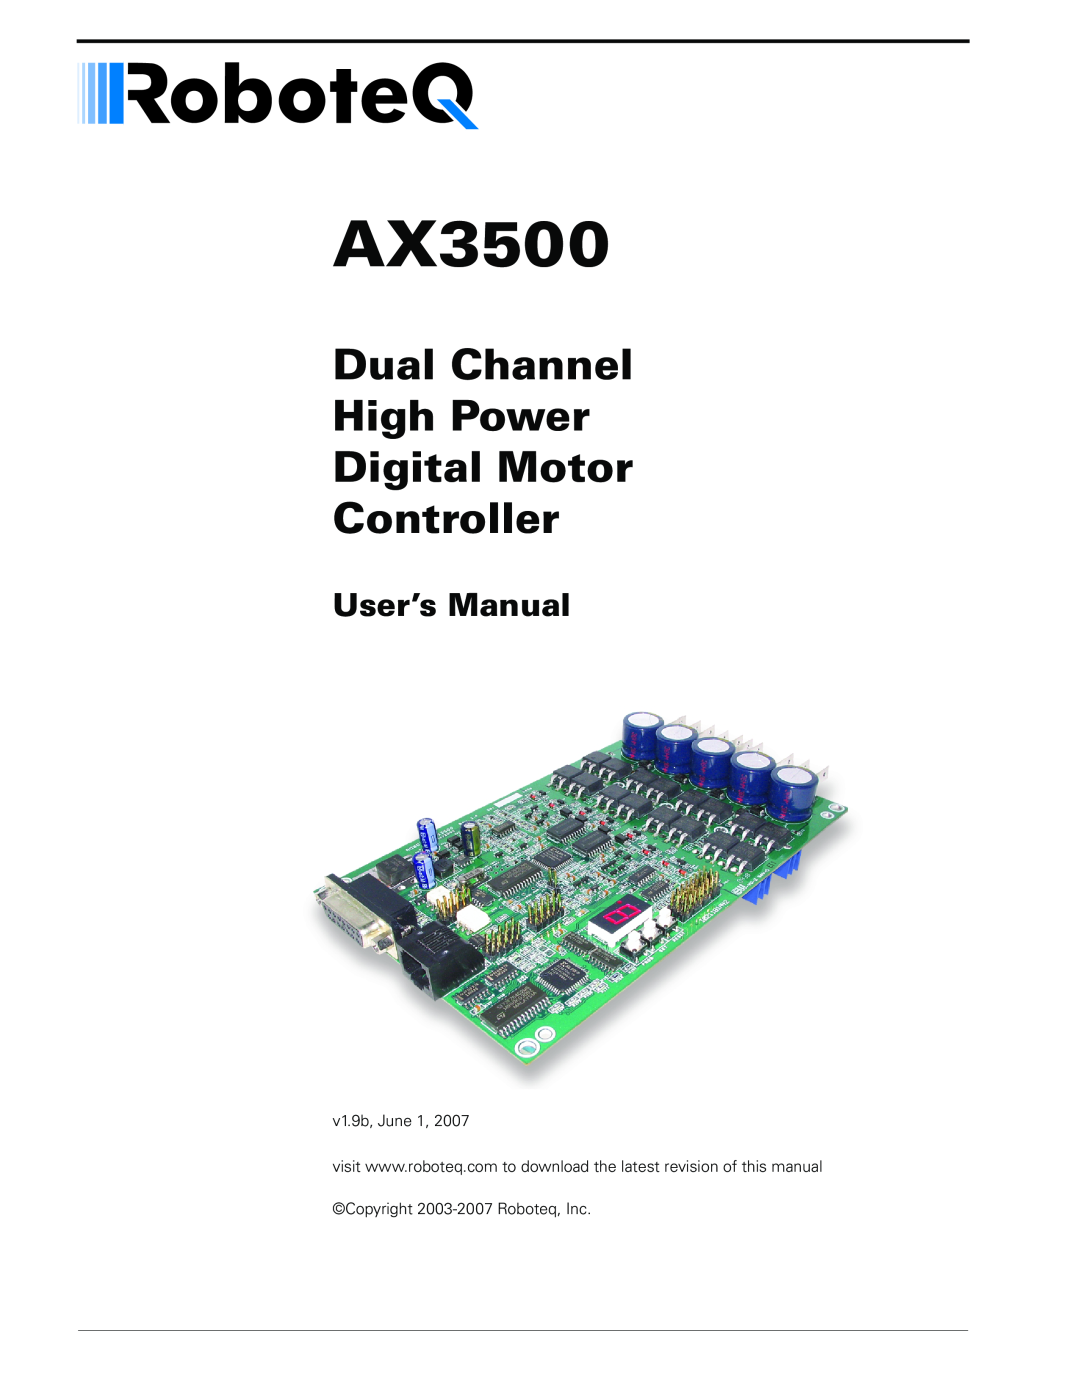 RoboteQ AX3500 user manual Dual Channel High Power Digital Motor Controller, User’s Manual 